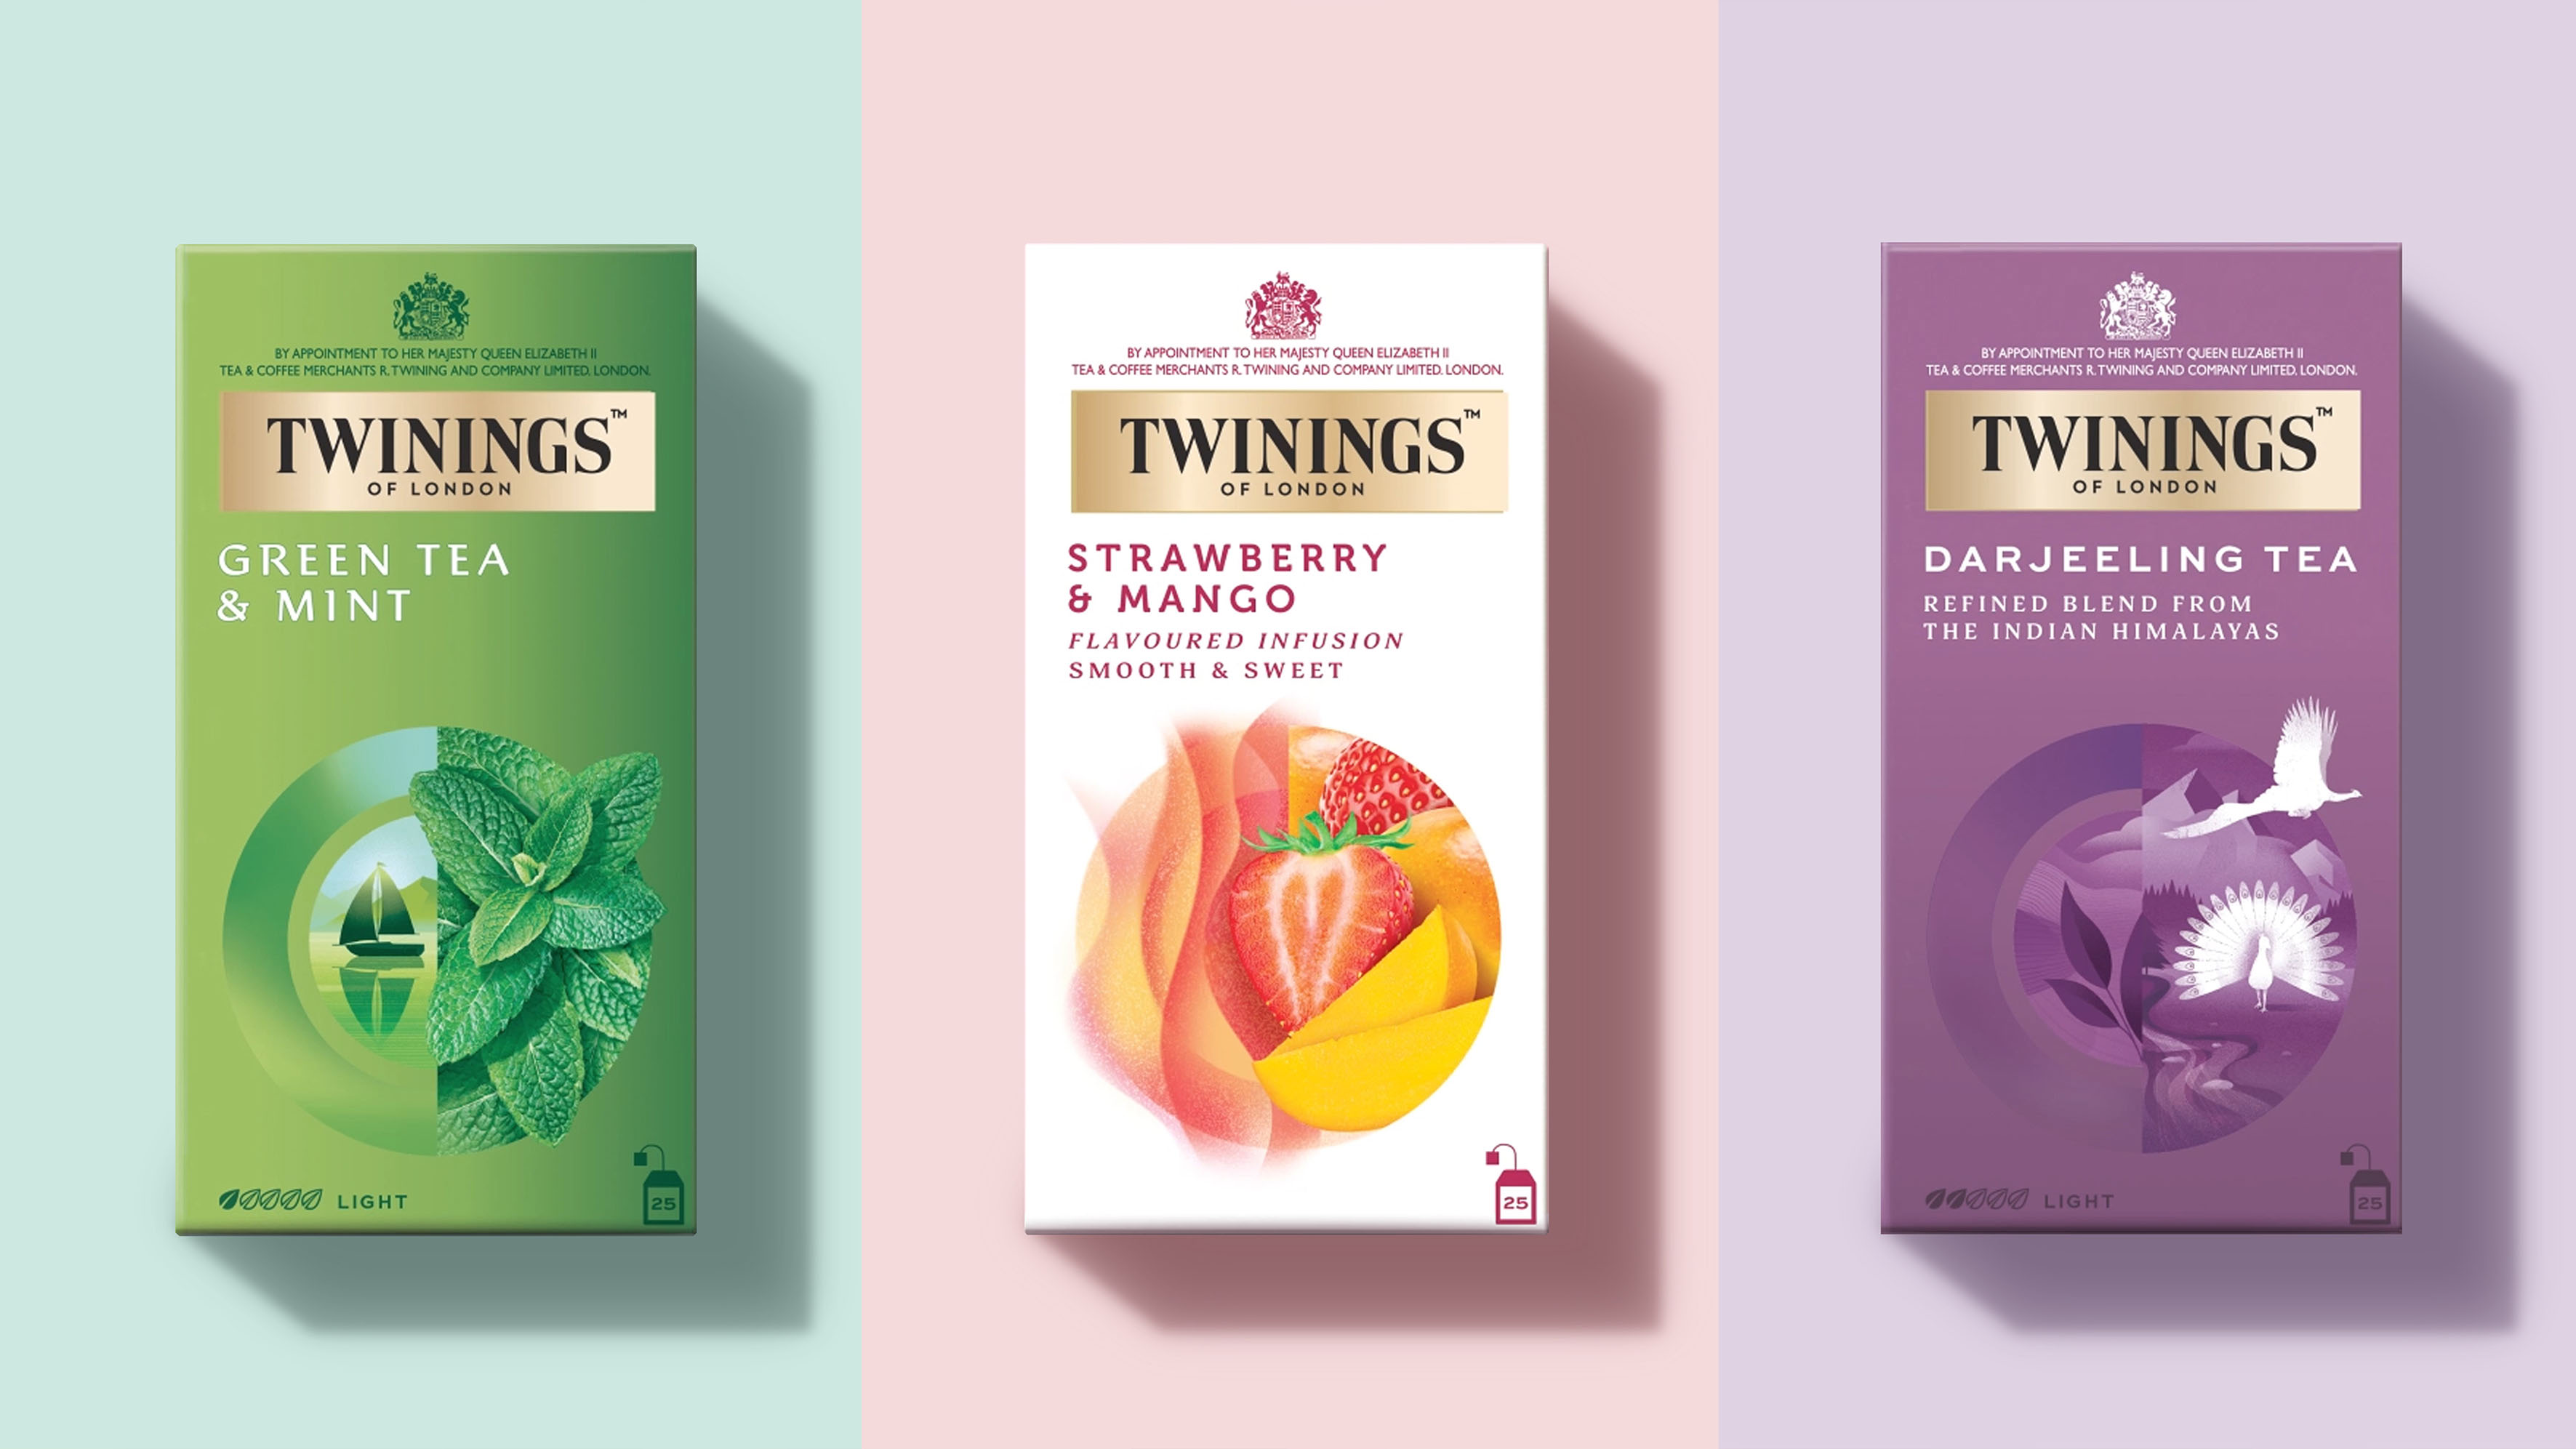 Butterfly Cannon Brings Cool London Luxe to Their Packaging Redesign and Campaign for Twinings Tea Ranges